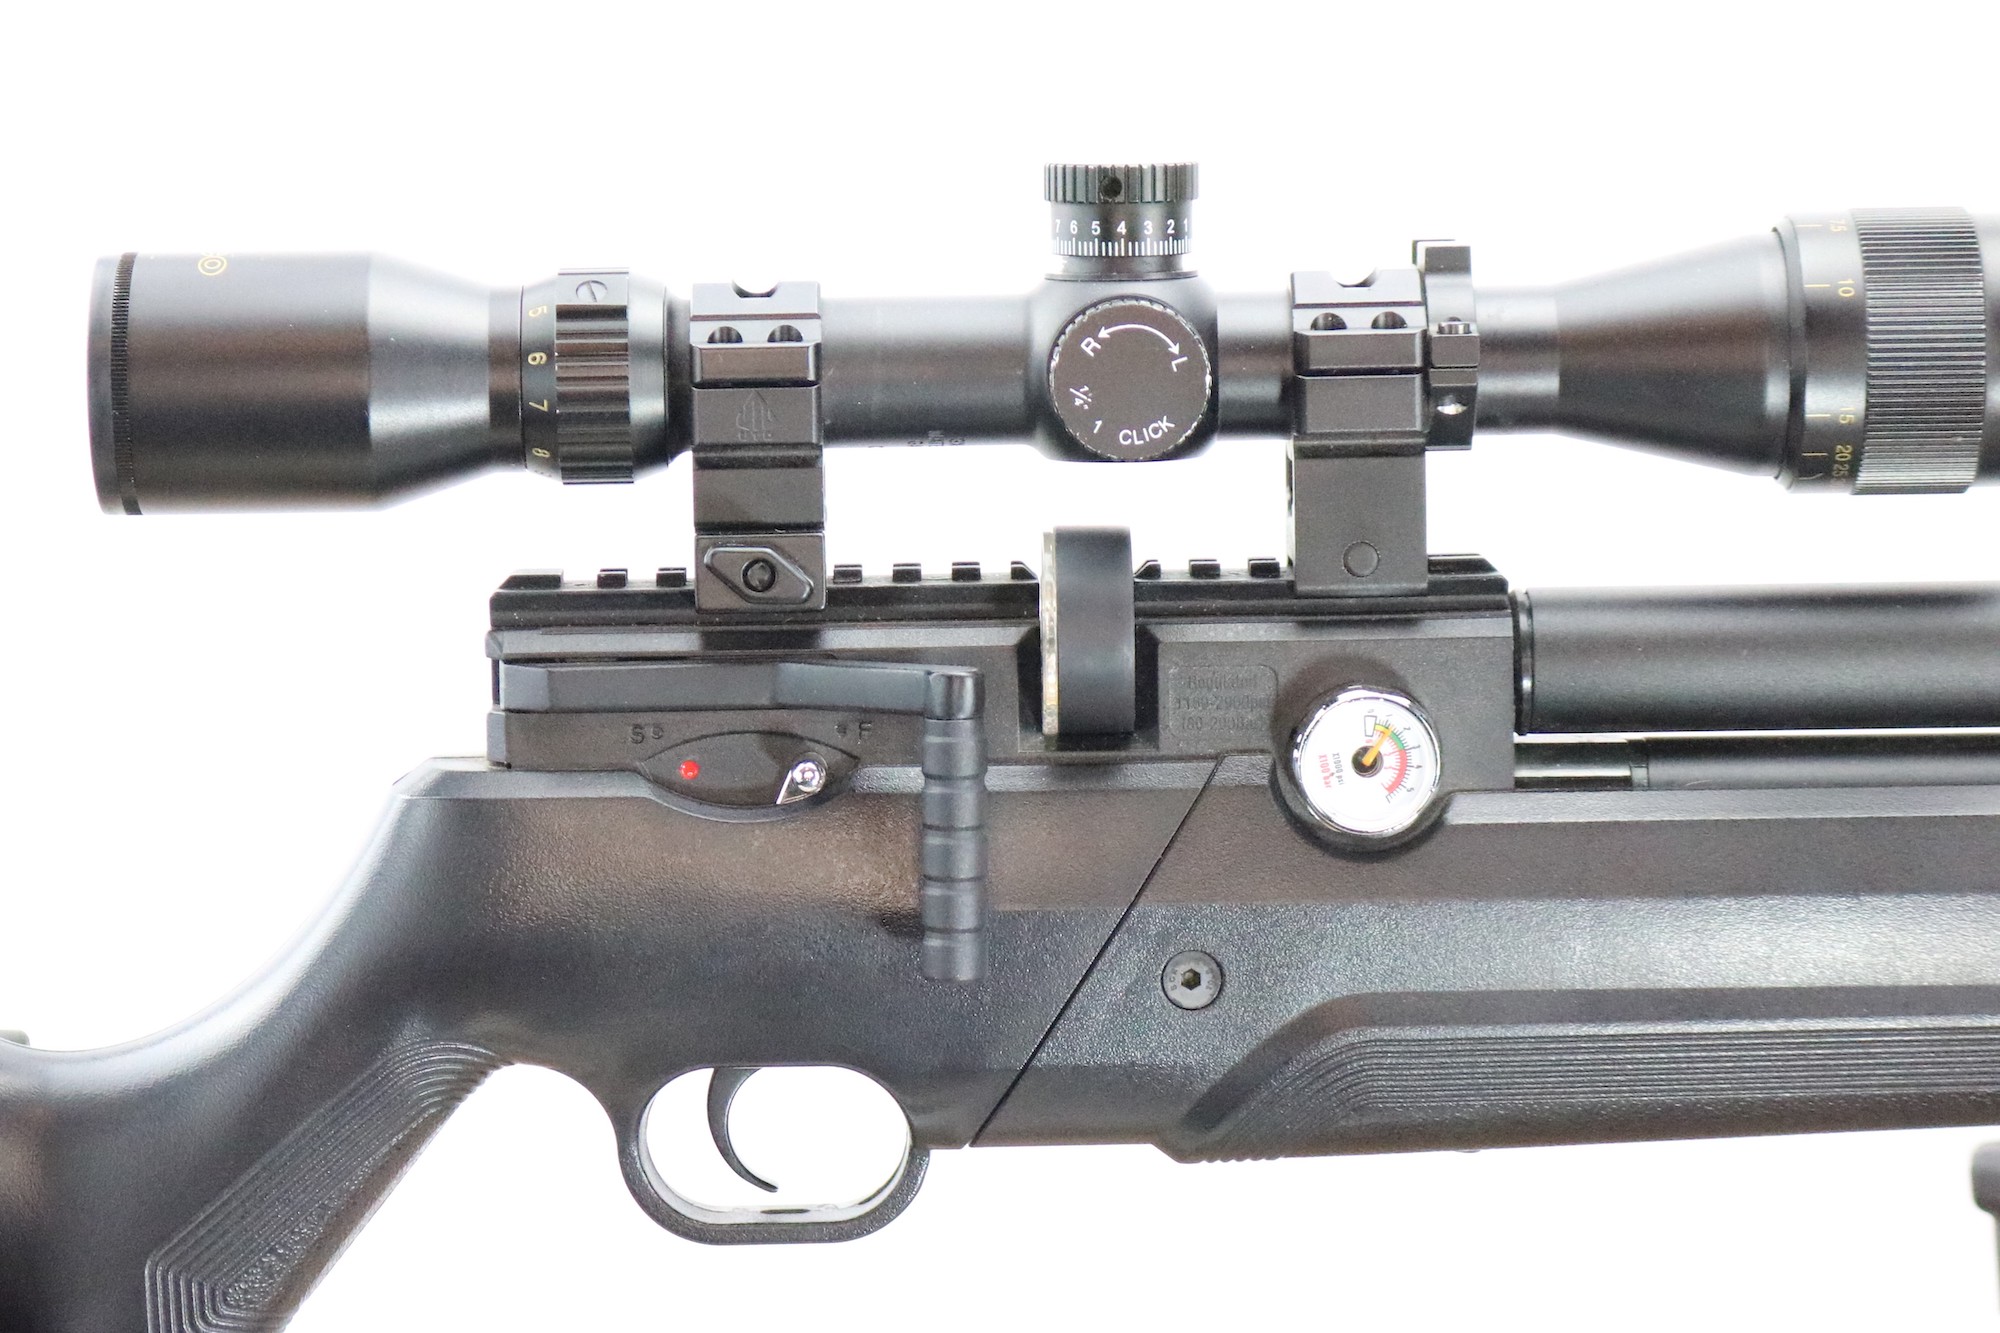 The middle section of an air gun